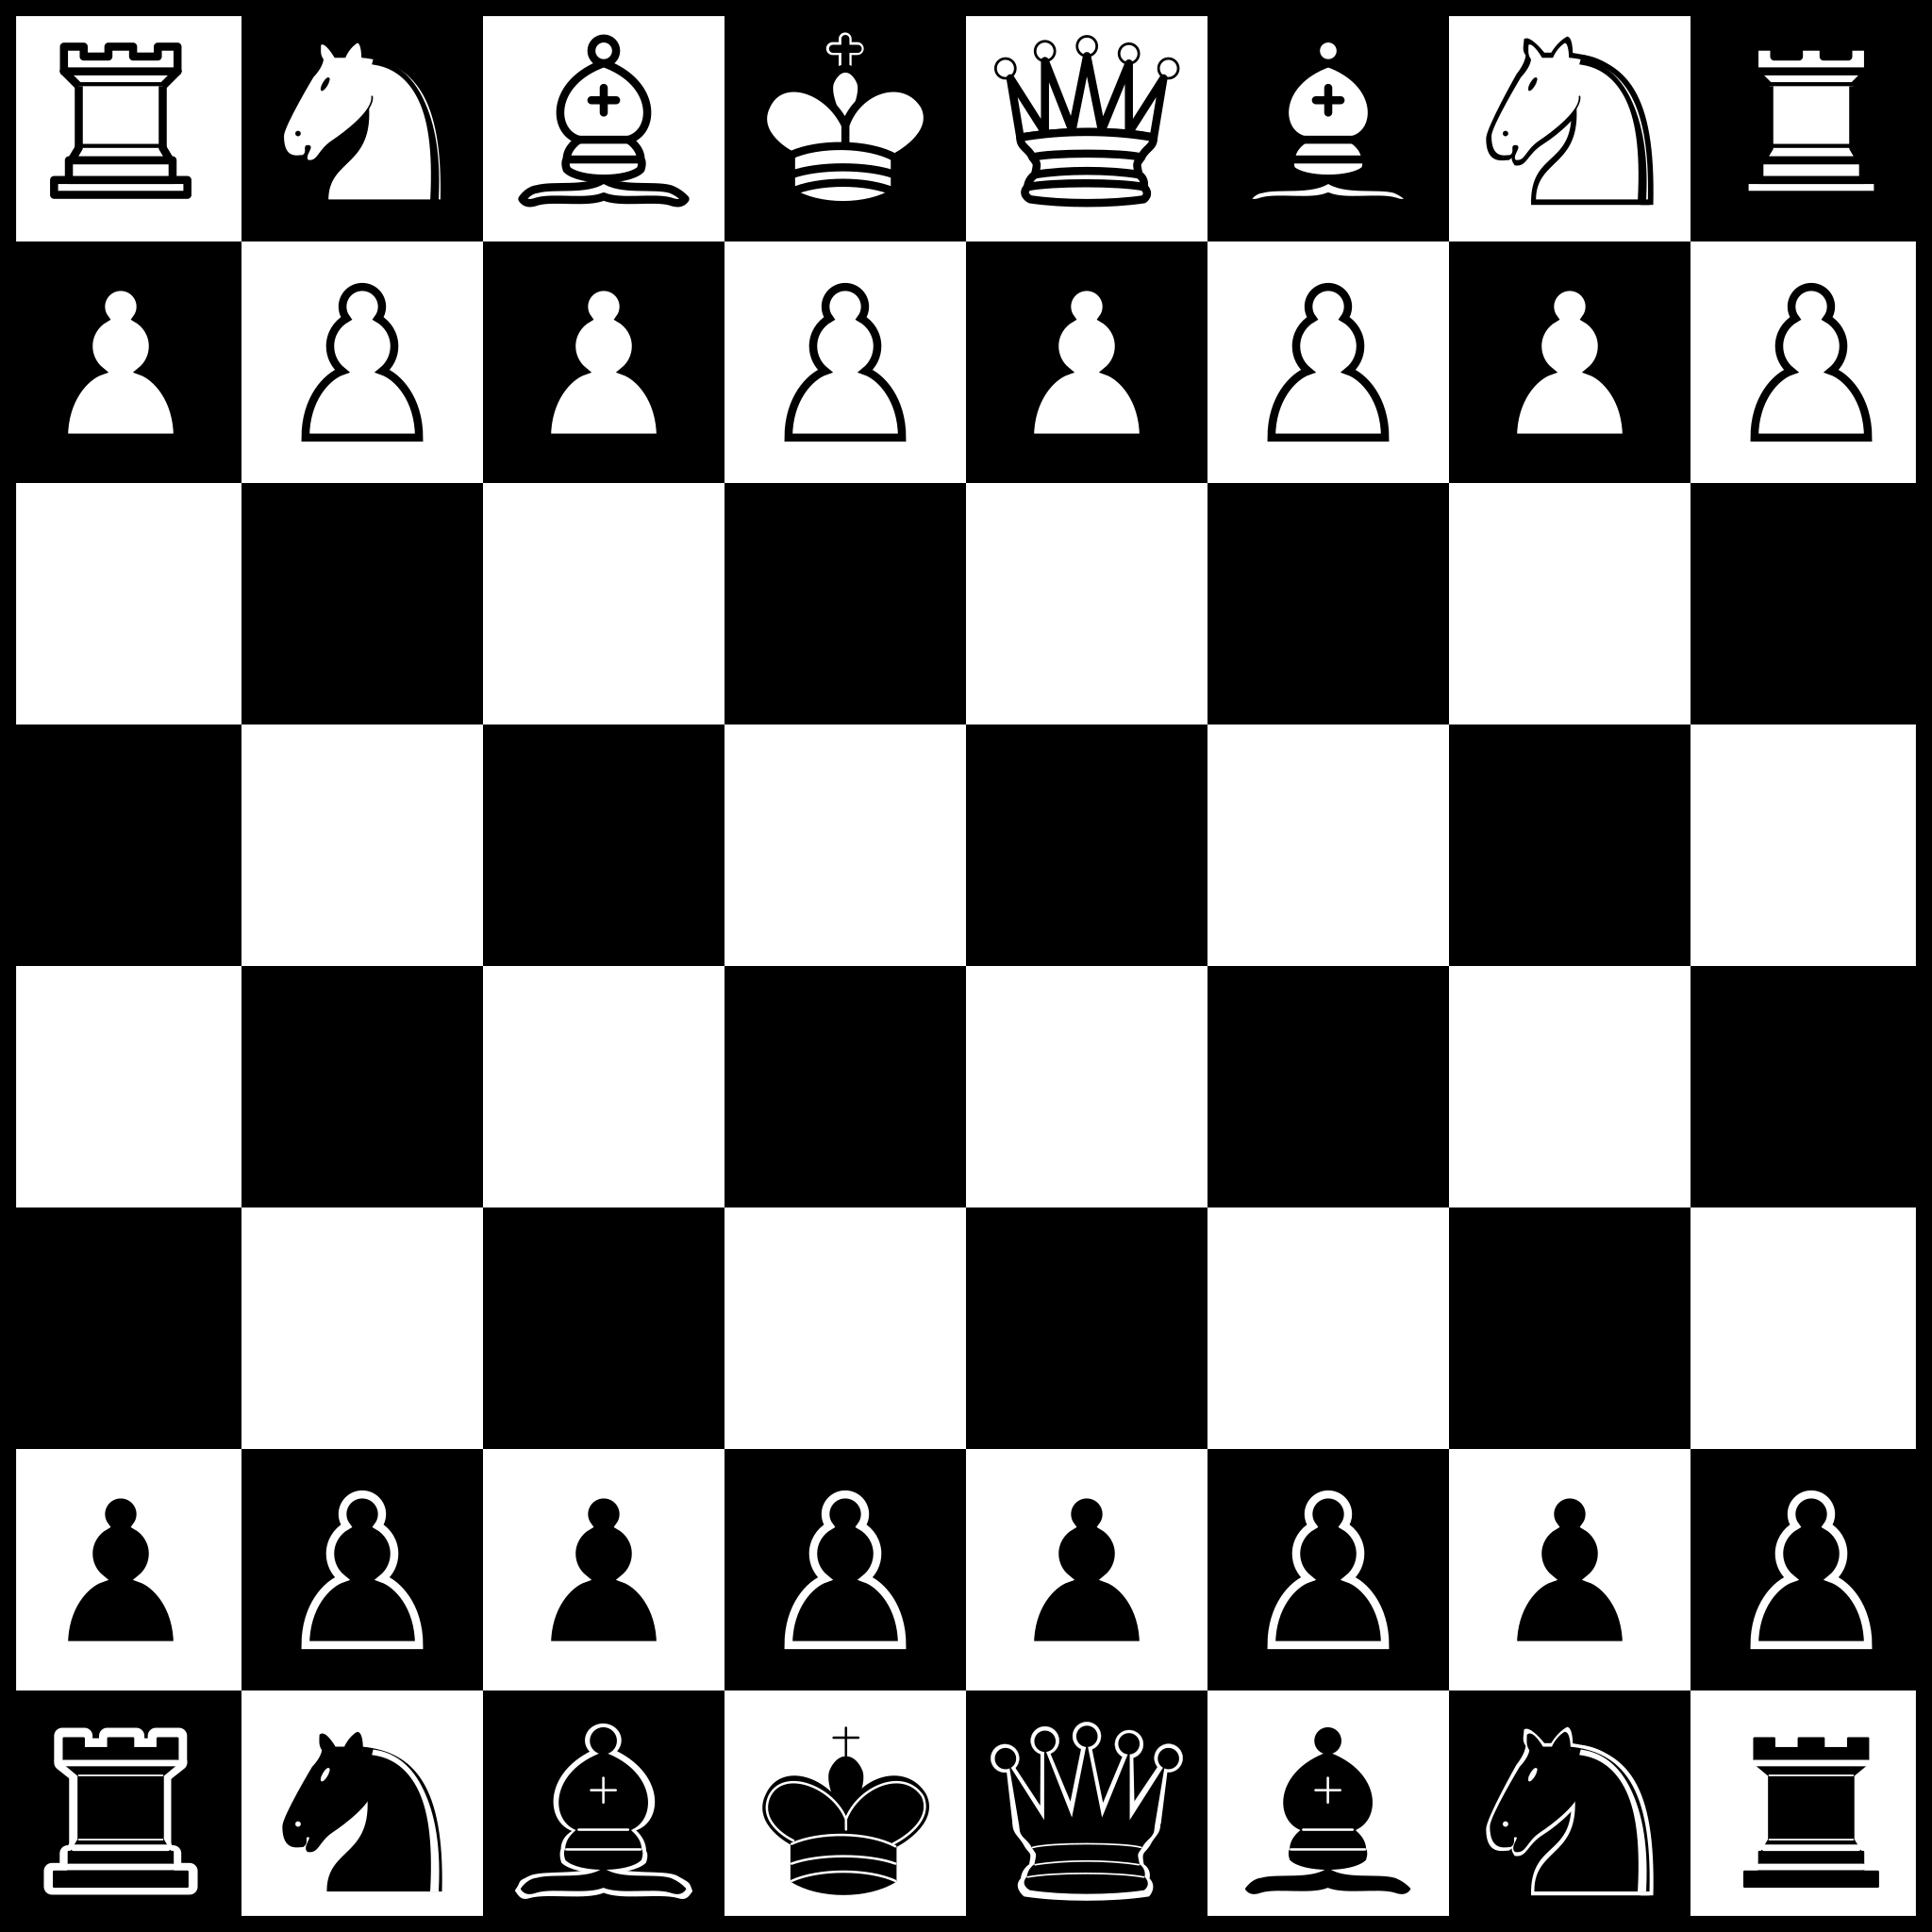 File:AAA SVG Chessboard and chess pieces 04.svg - Wikimedia Commons